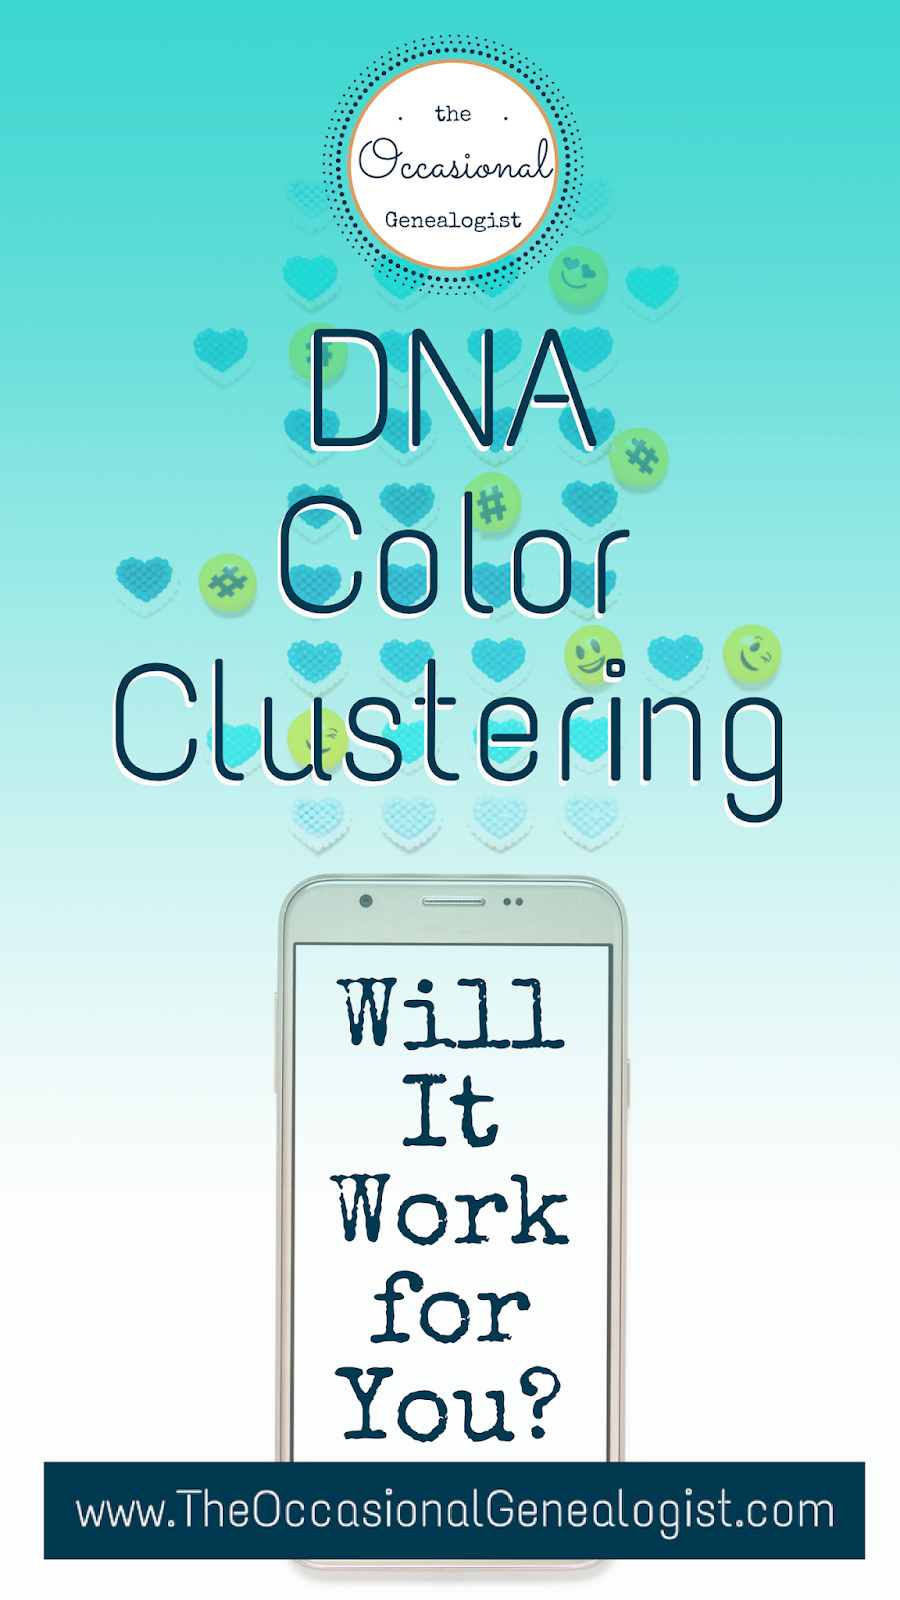 Auto-clustering, Genetic Networks, and Kissing Cousins